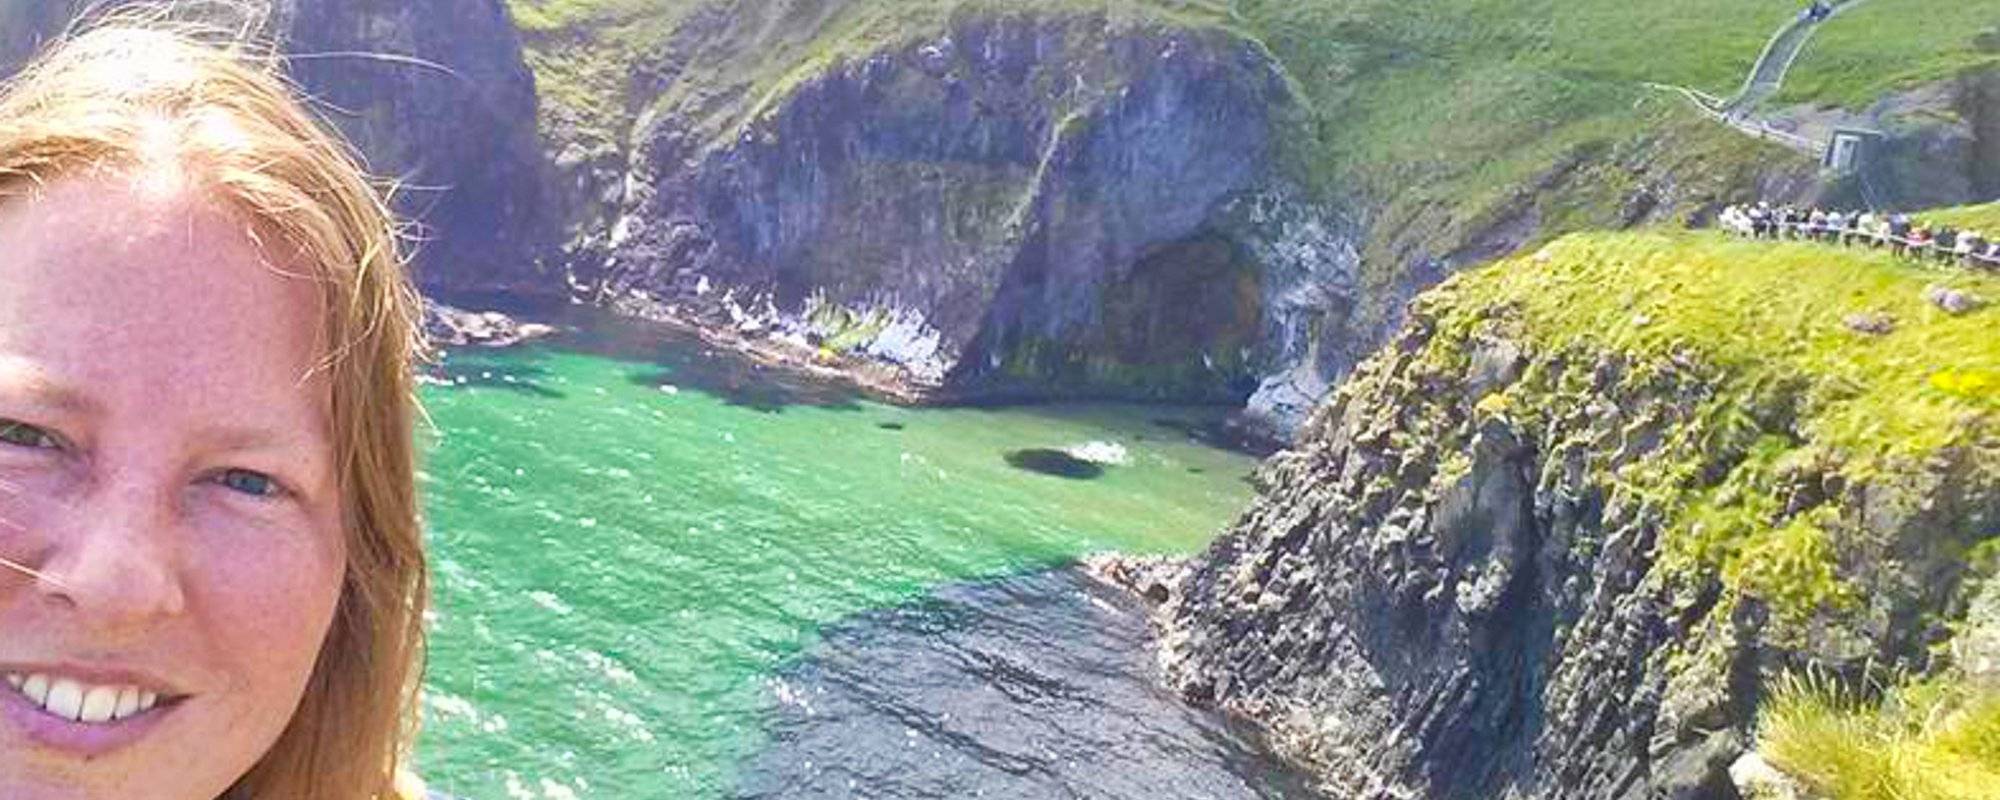 Ireland & the back arse of nowhere #10: Carrick-a-Rede Rope Bridge